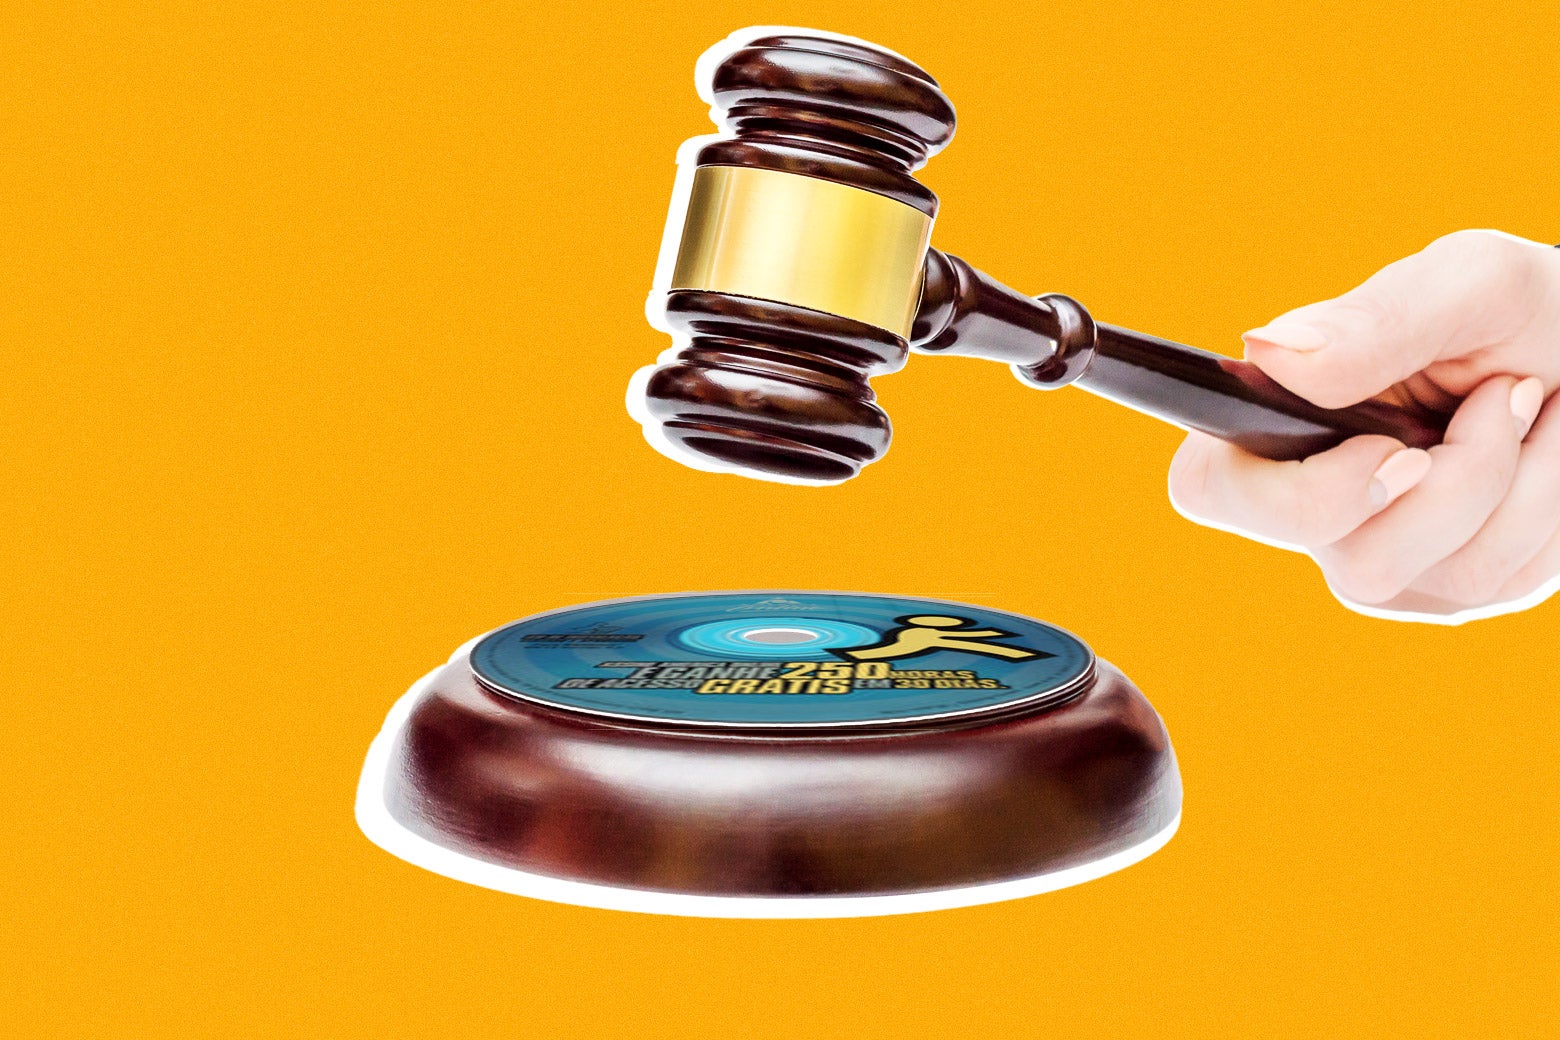 A hand holds a gavel just above a base that includes an AOL CD-ROM.